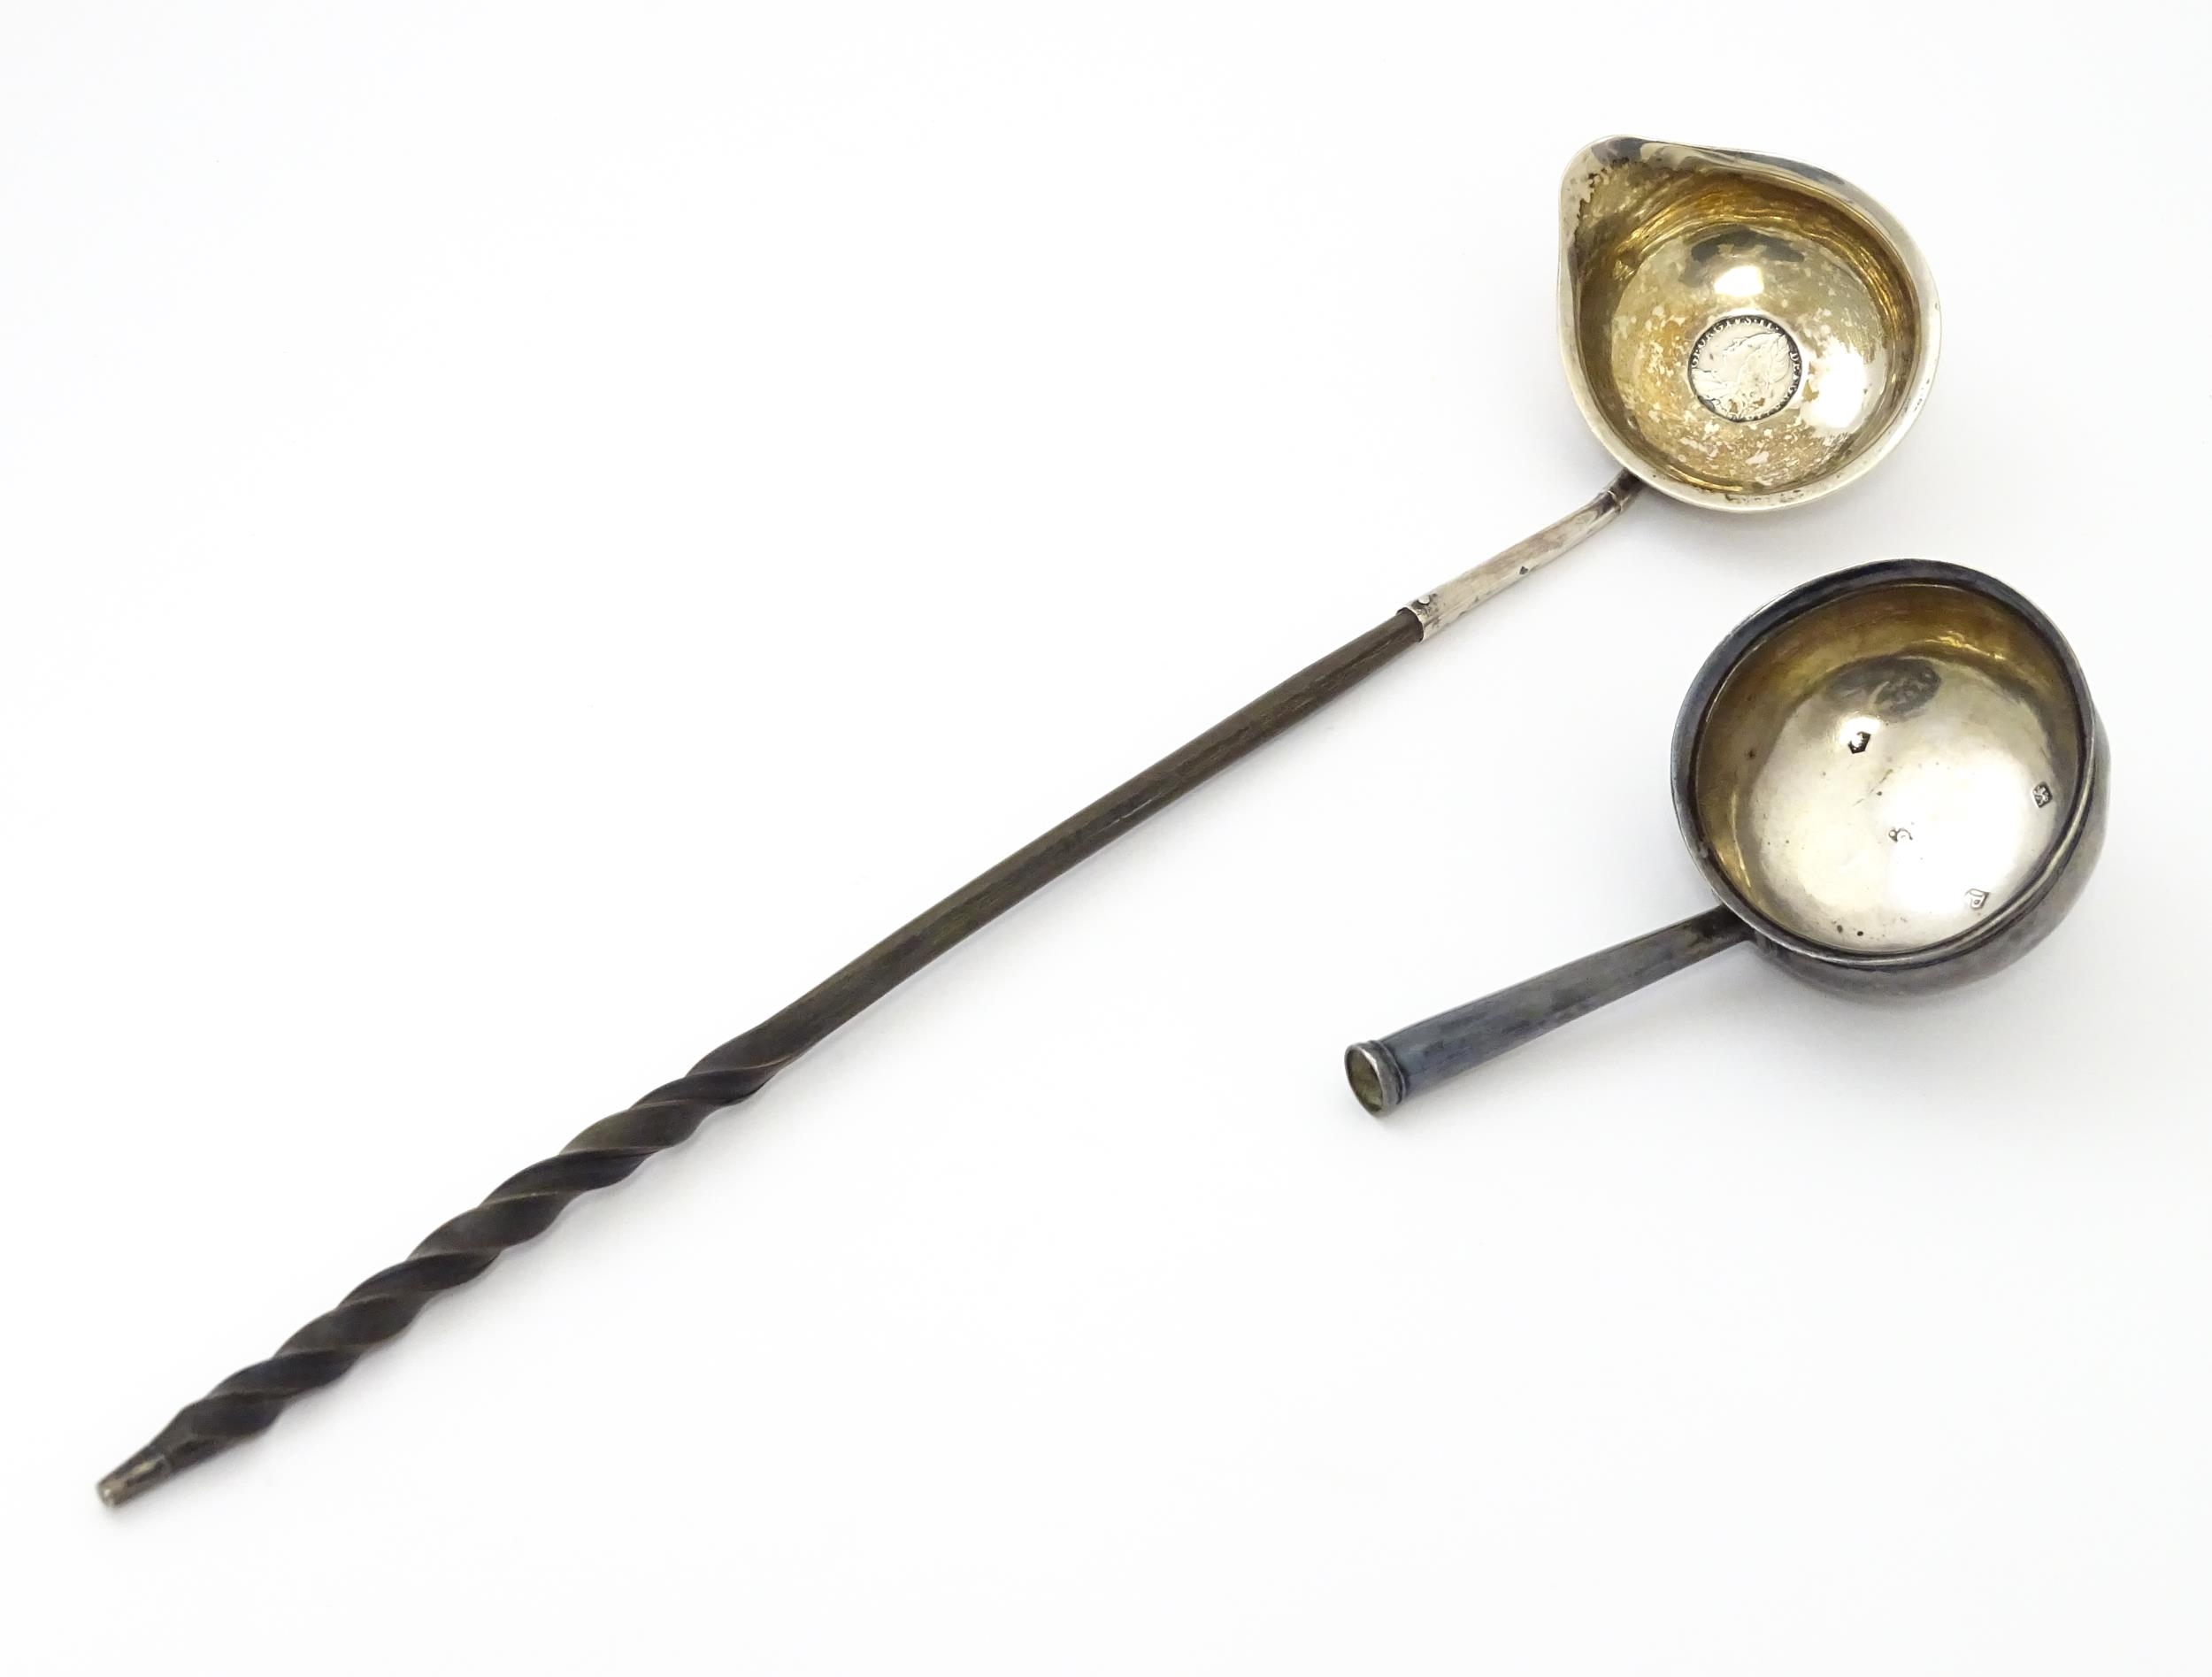 An 18thC toddy ladle with silver bowl hallmarked London 1794 maker Peter and Ann Bateman, together